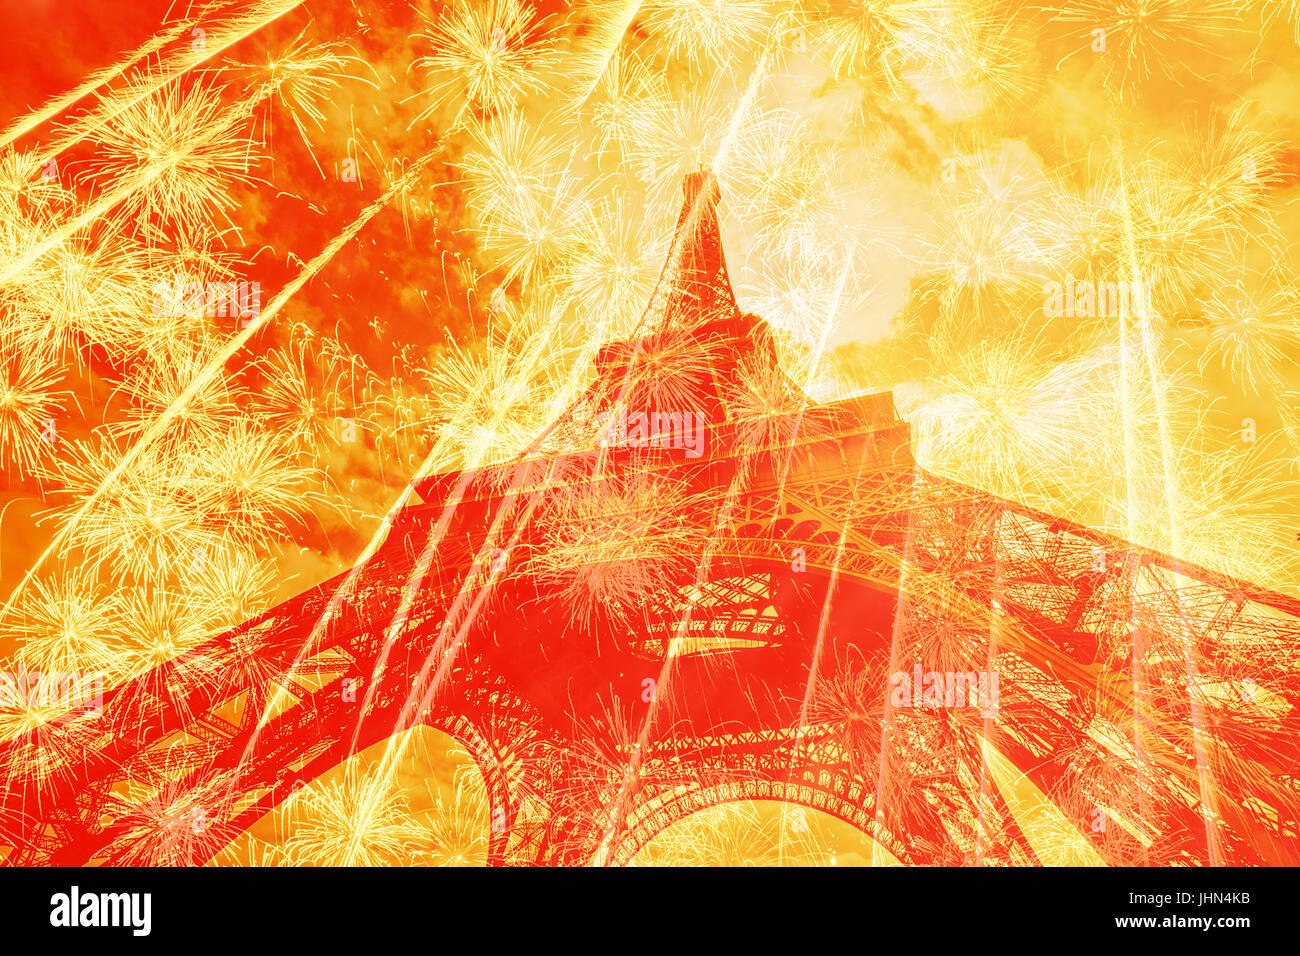 Eiffel tower against bright  holiday fireworks Stock Photo